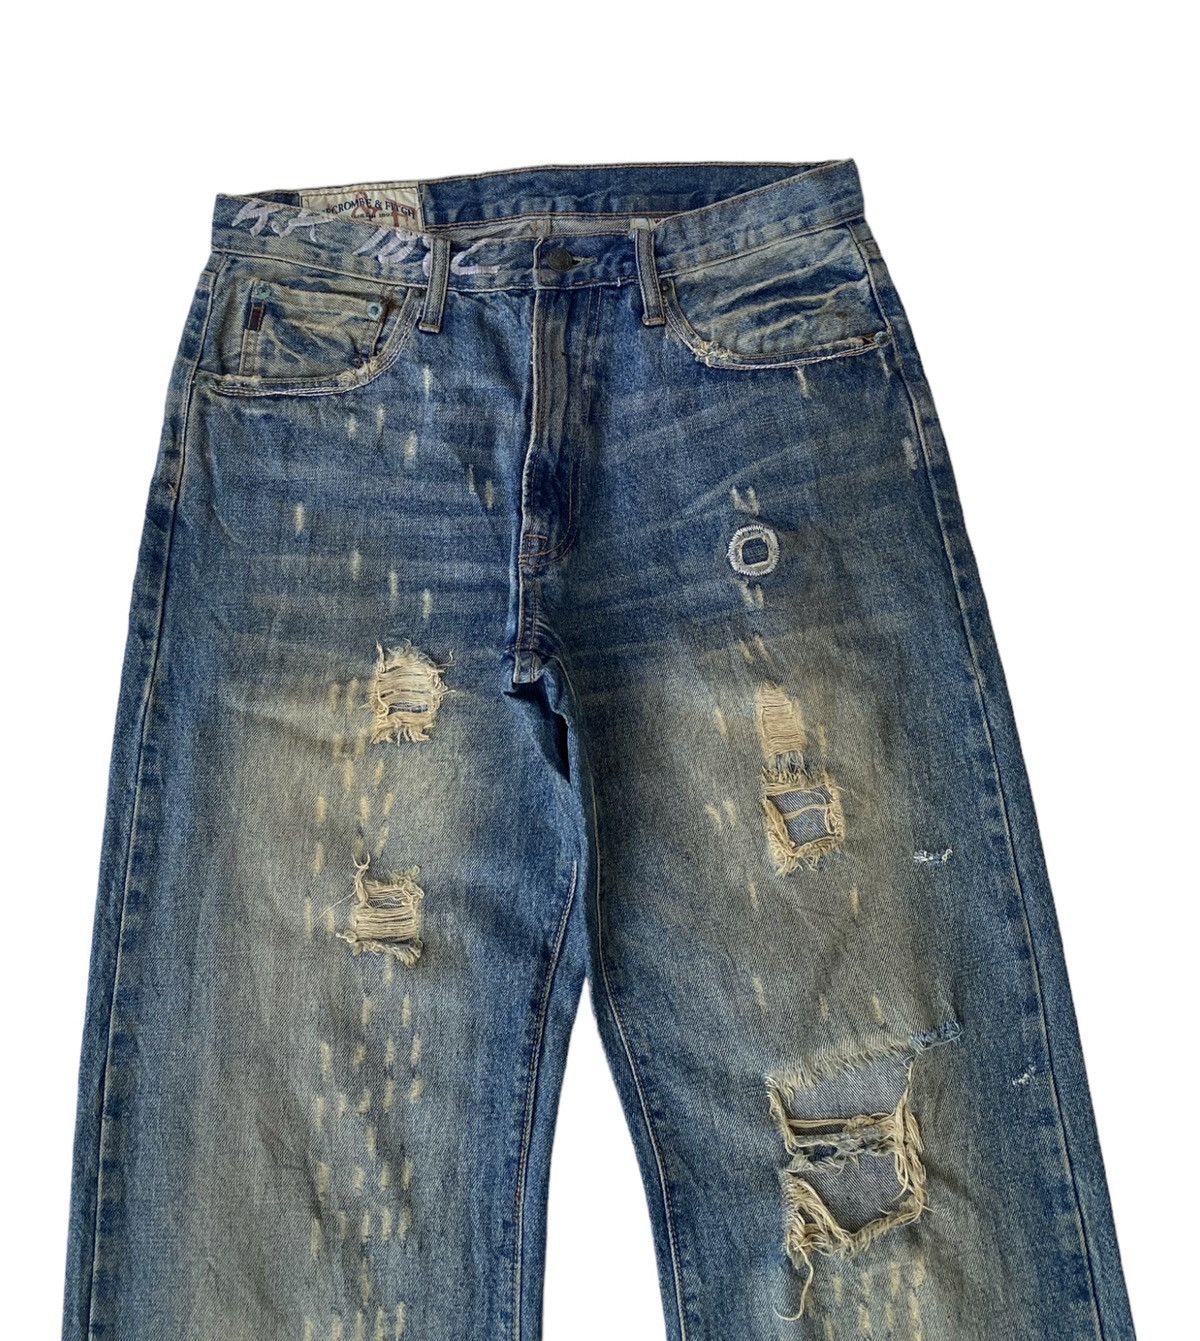 🔥FLARE JEANS RUSTY BAGGY ABERCROMBIE & FITCH DISTRESS DENIM - 6